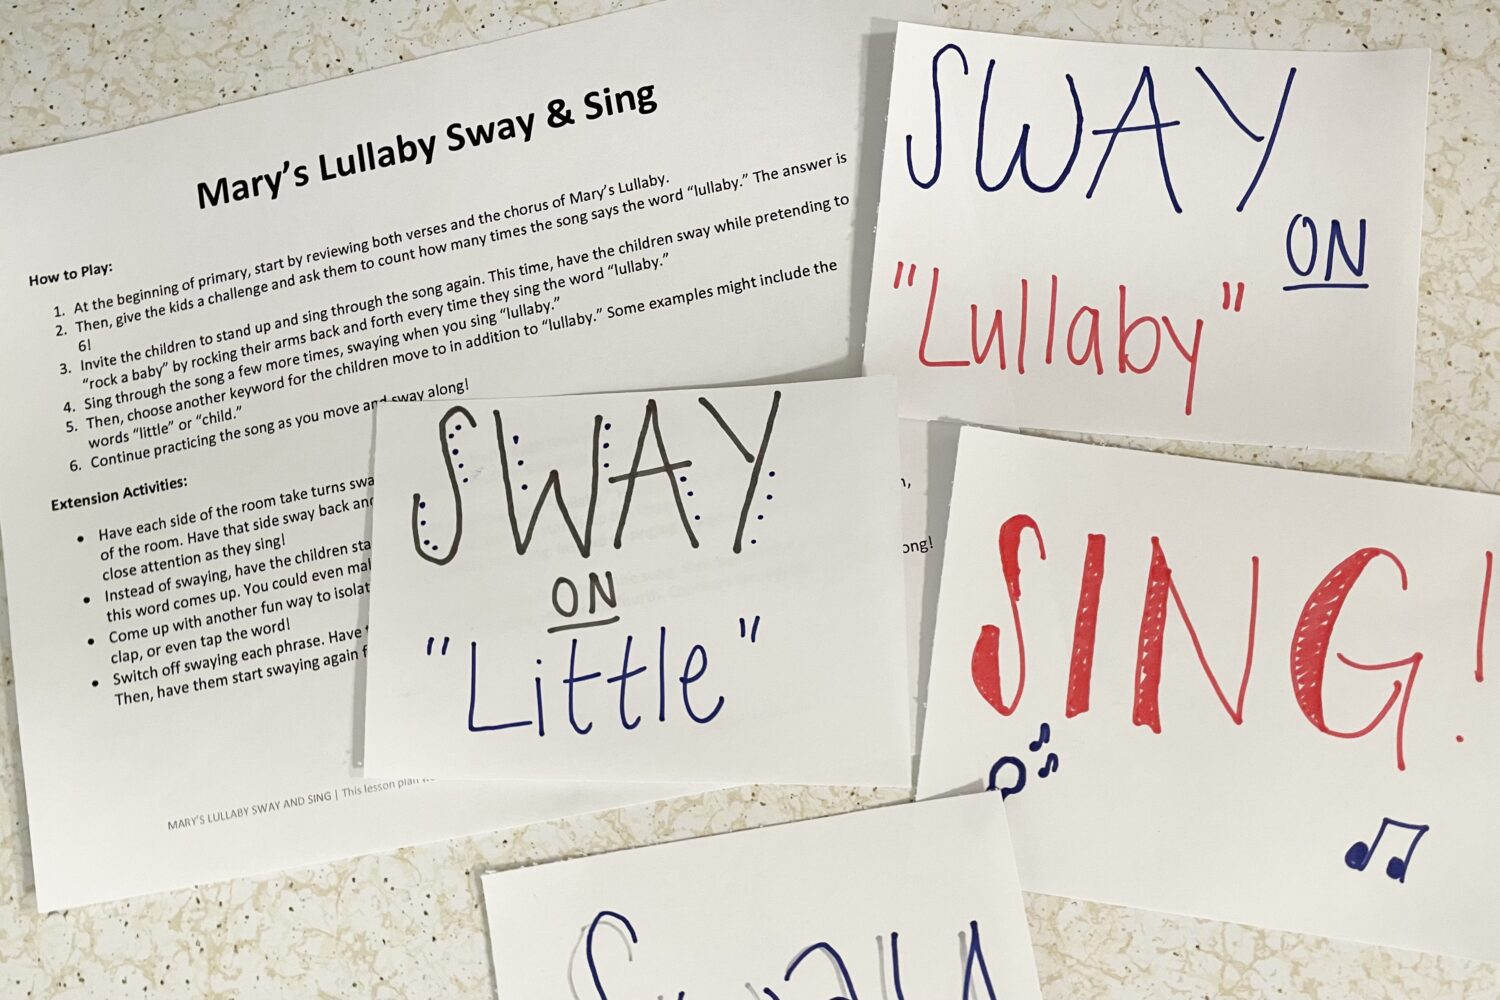 Mary's Lullaby Christmas Song Sway & Sing Easy ideas for Music Leaders IMG 7704